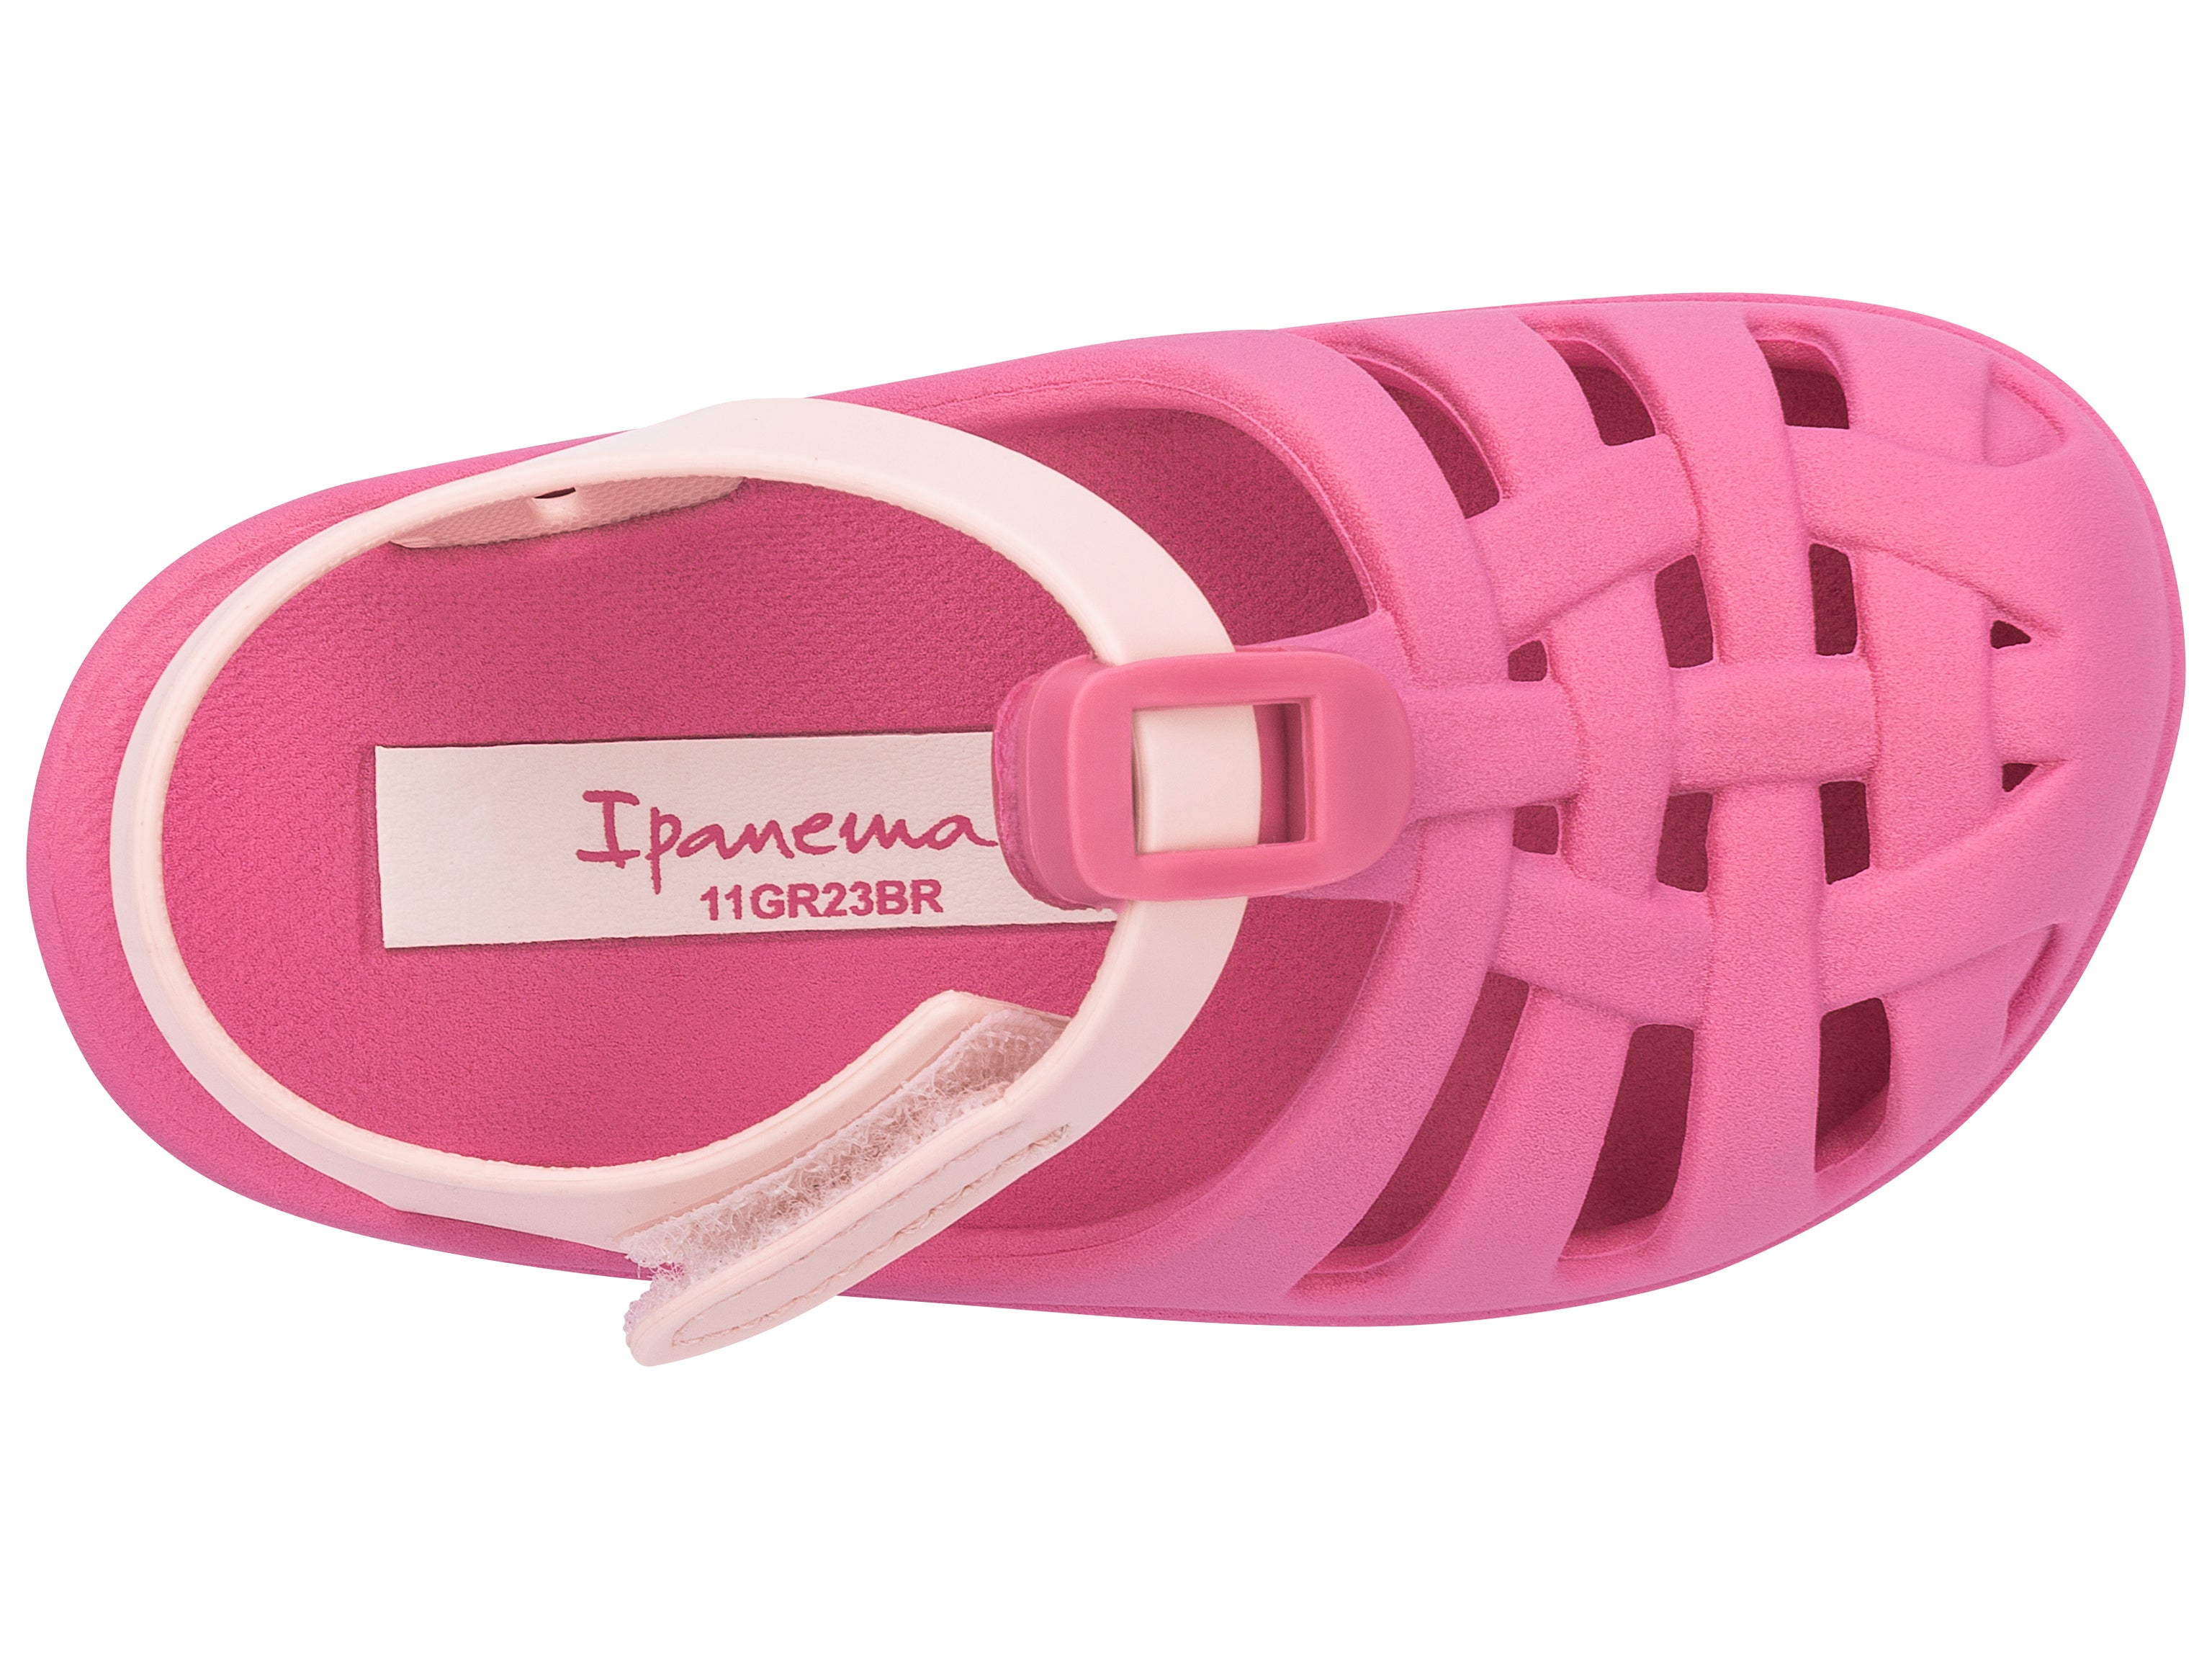 Top view of a pink Ipanema Summer Basic baby sandal.